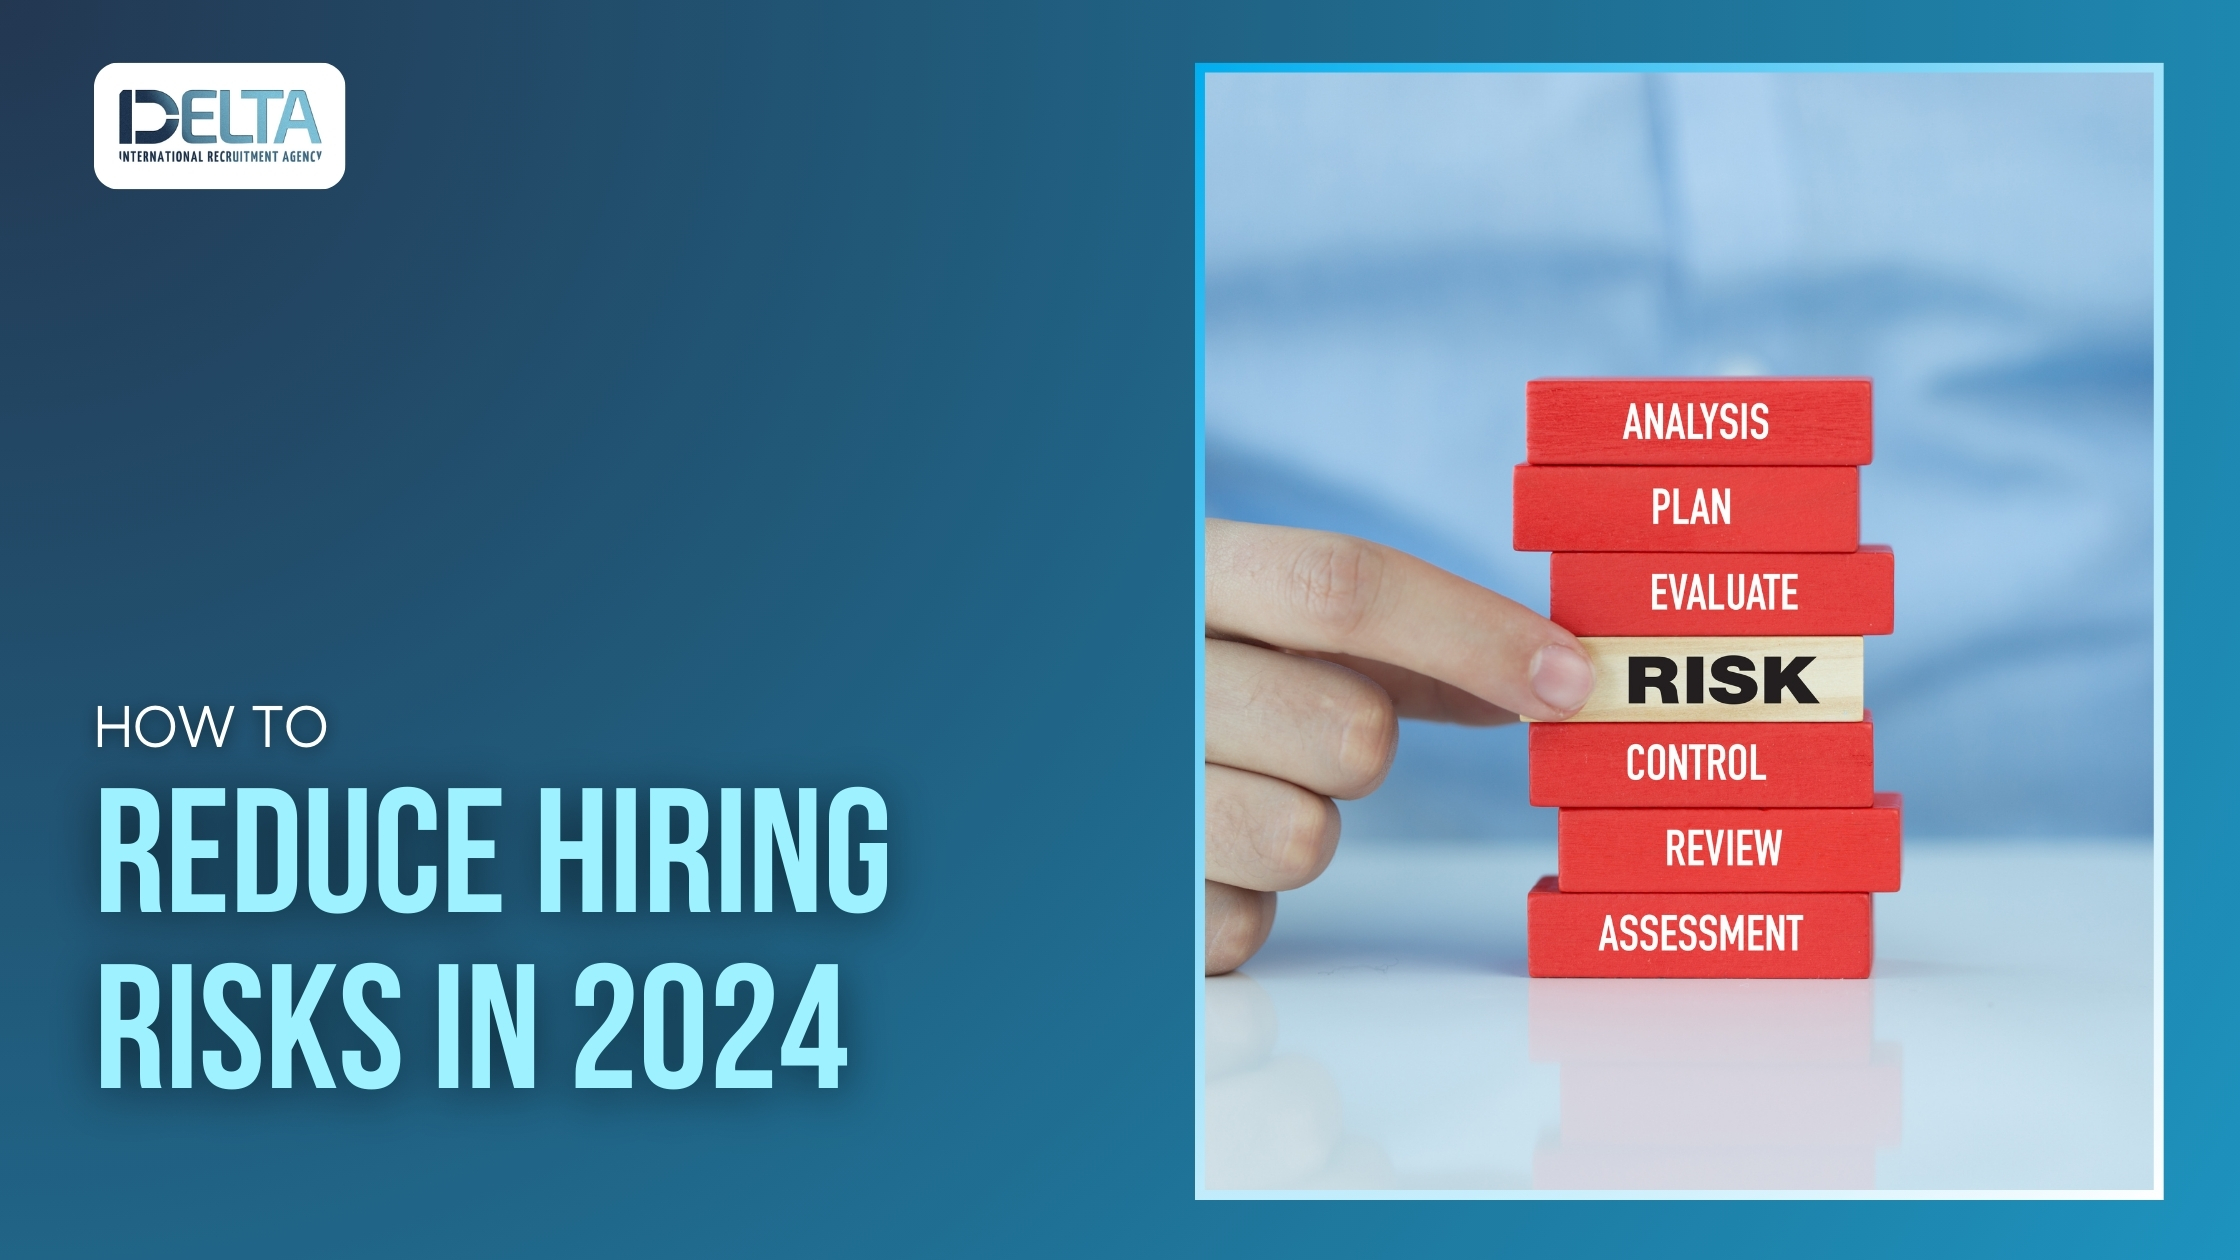 How to Reduce Hiring Risks in 2024